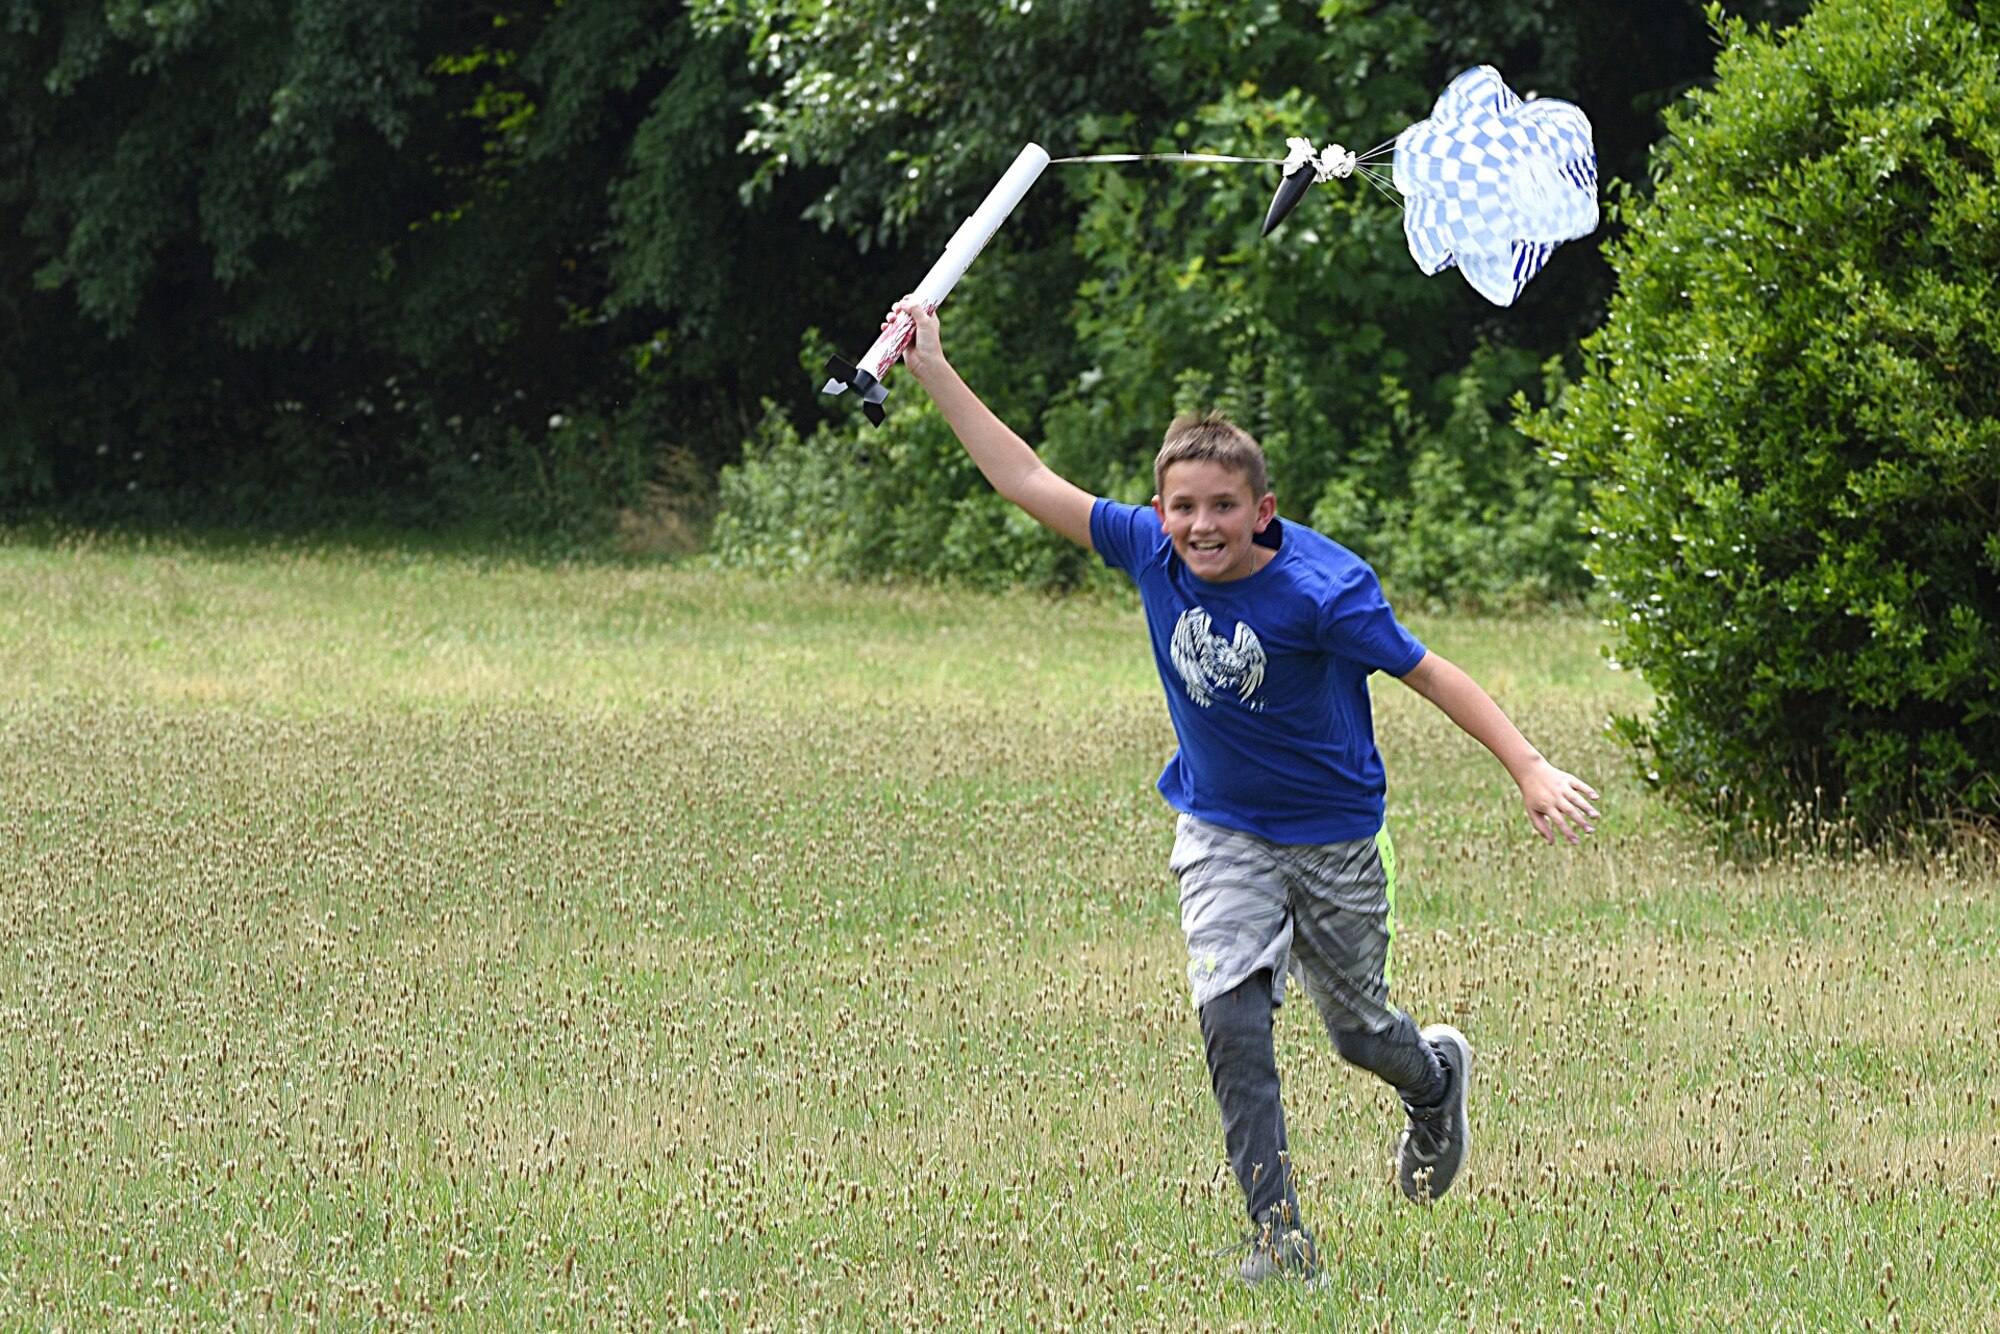 Louis Helms, son of U.S. Air Force Major Jeannie Helms, 145th Comptroller Flight commander, launches and catches his model rocket near Reid Park Academy Charlotte, N.C., June 21, 2018. Helms, along with other campers and teachers are part of the annual Department of Defense STARBASE summer camp program with the North Carolina Air National Guard and they learn various applications of science, technology, engineering, and math.